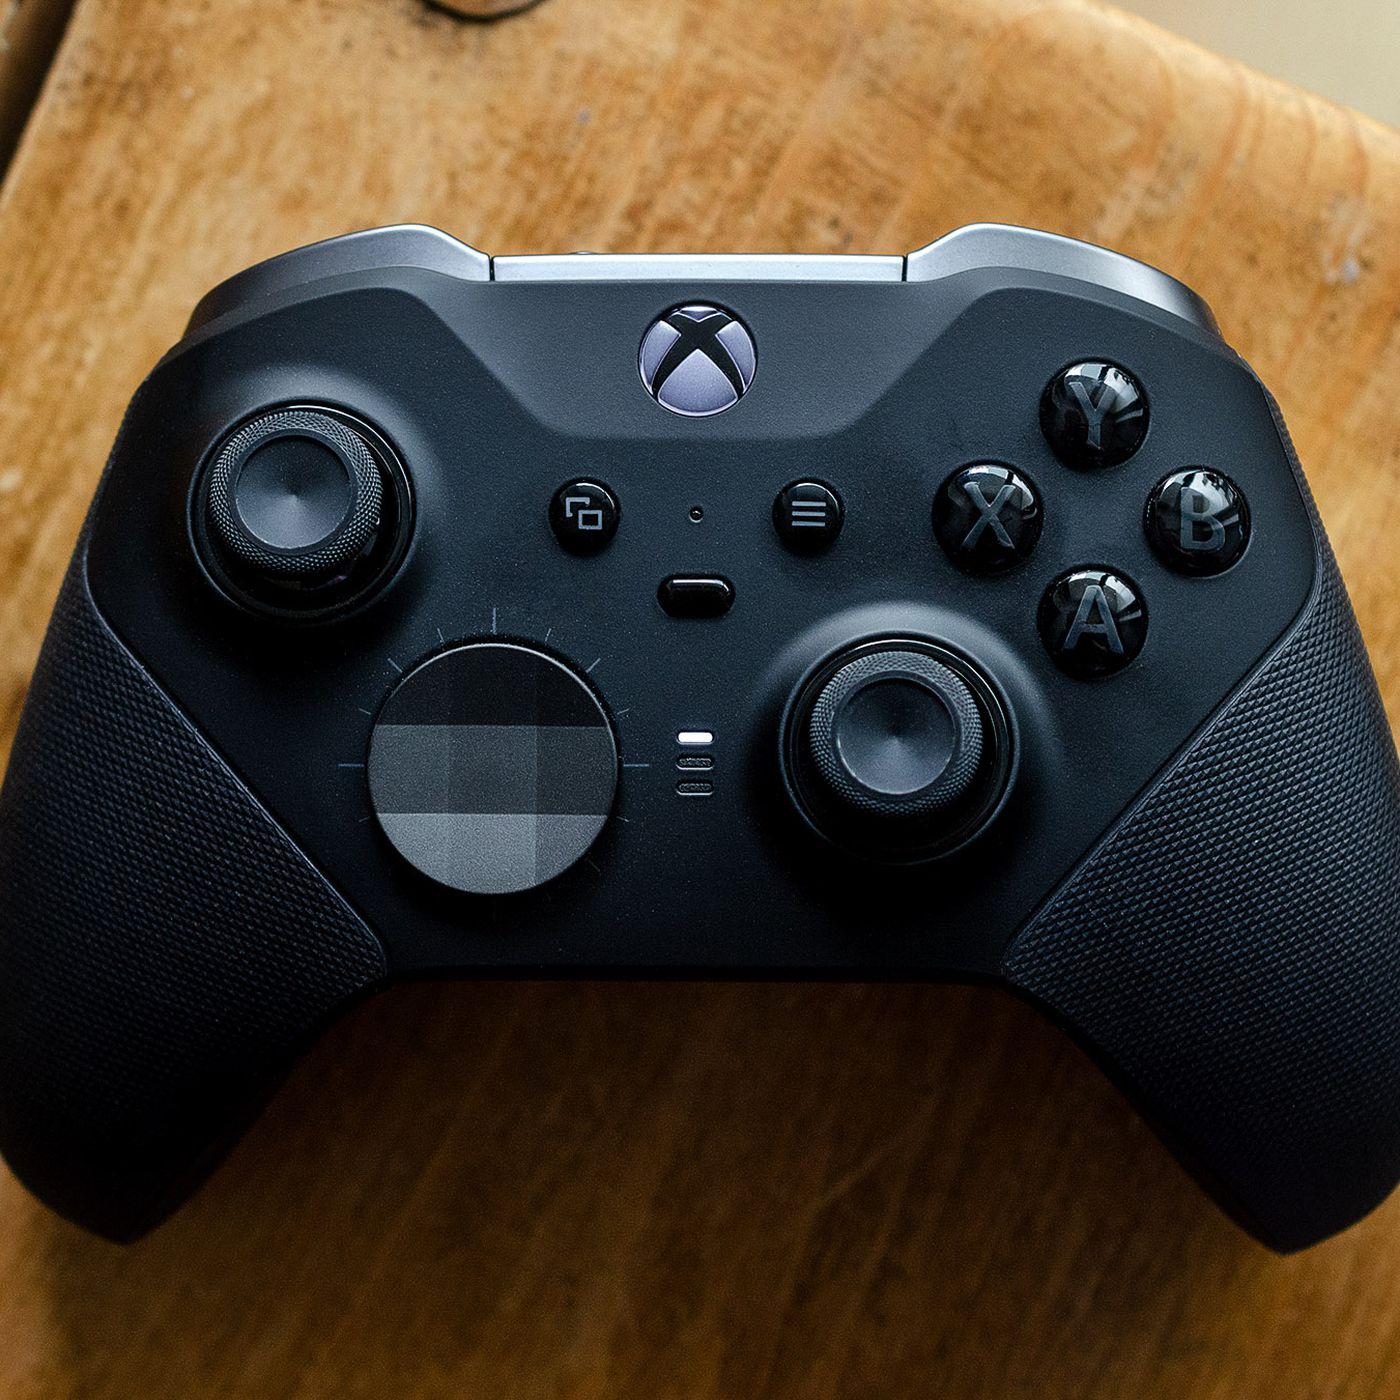 Mayor Cheetah Several Xbox Elite Wireless Controller Series 2 review - The Verge